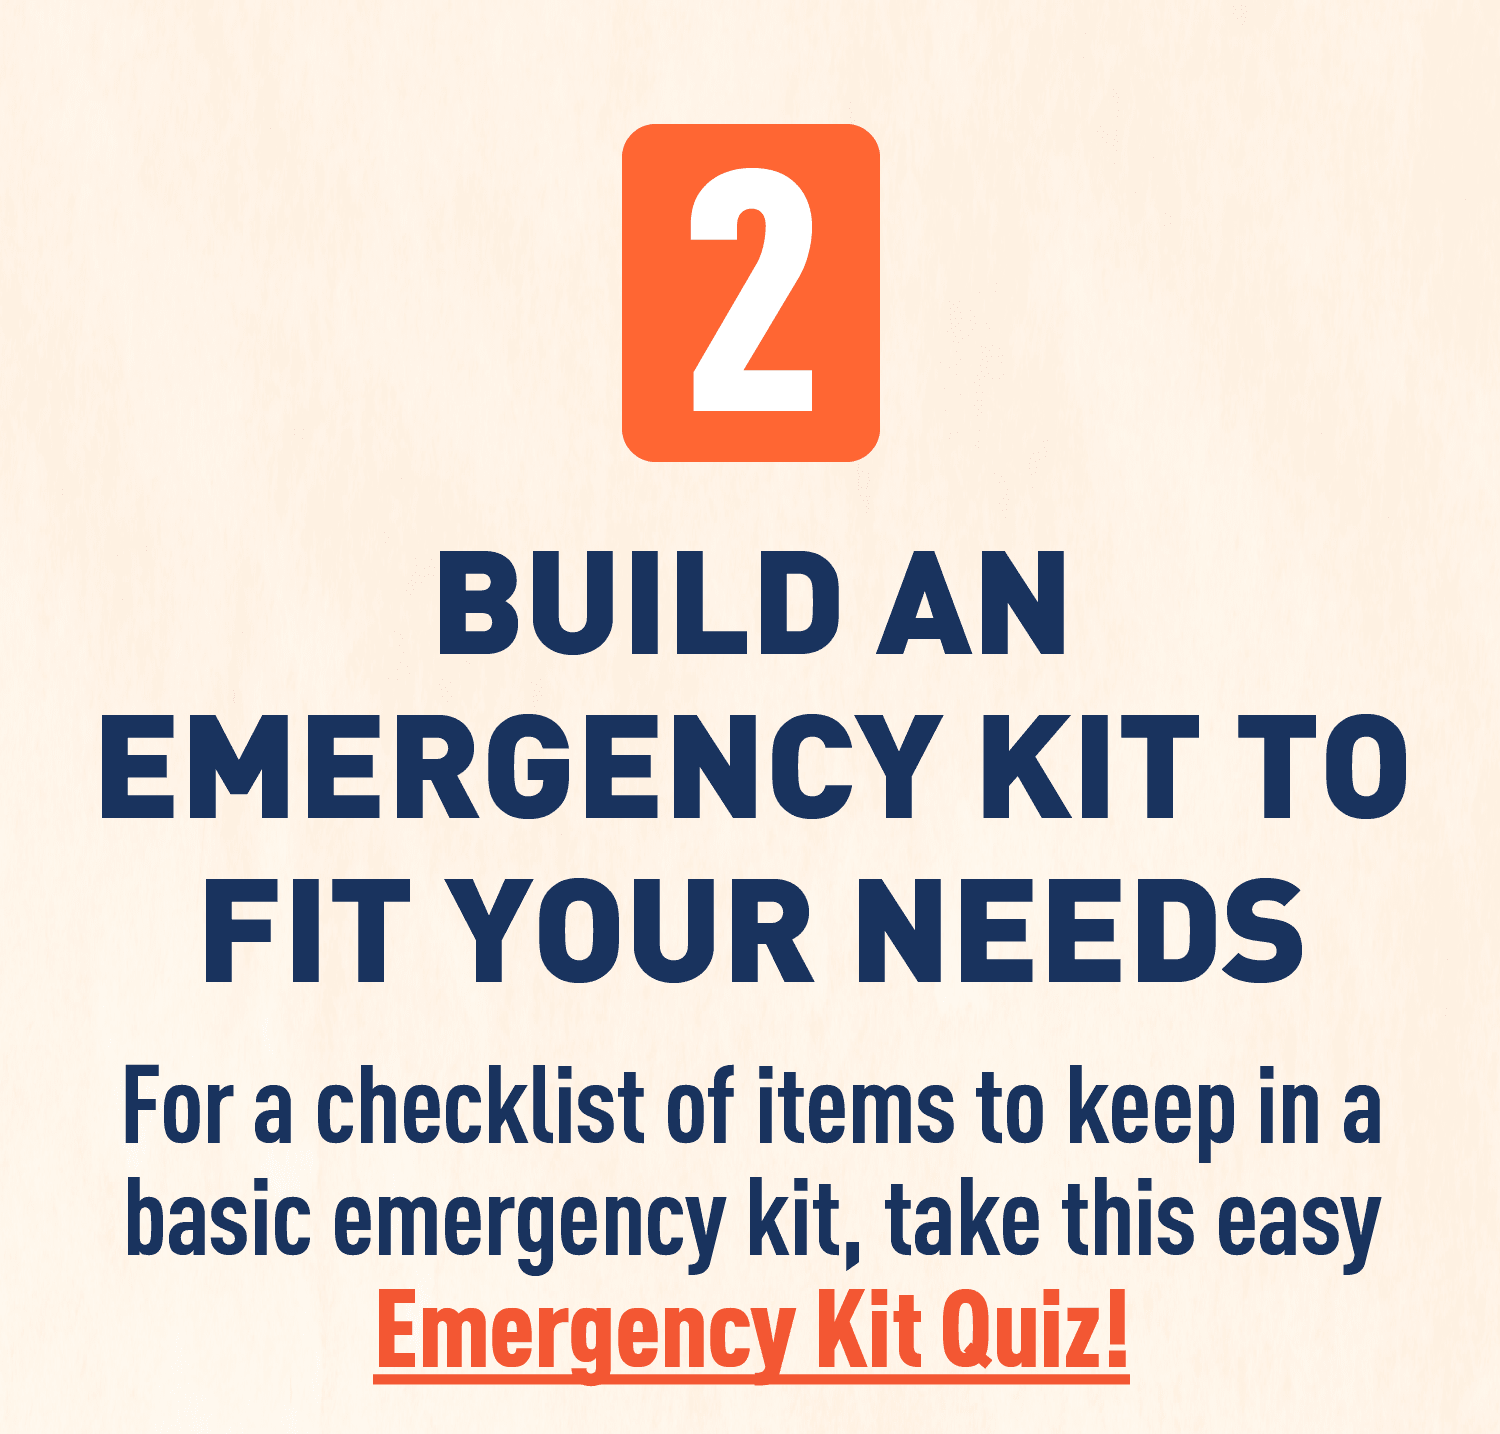 Text: BUILD AN EMERGENCY KIT TO FIT YOUR NEEDS For a checklist of items to keep in a basic emergency kit, take this easy Emergency Kit Quiz!